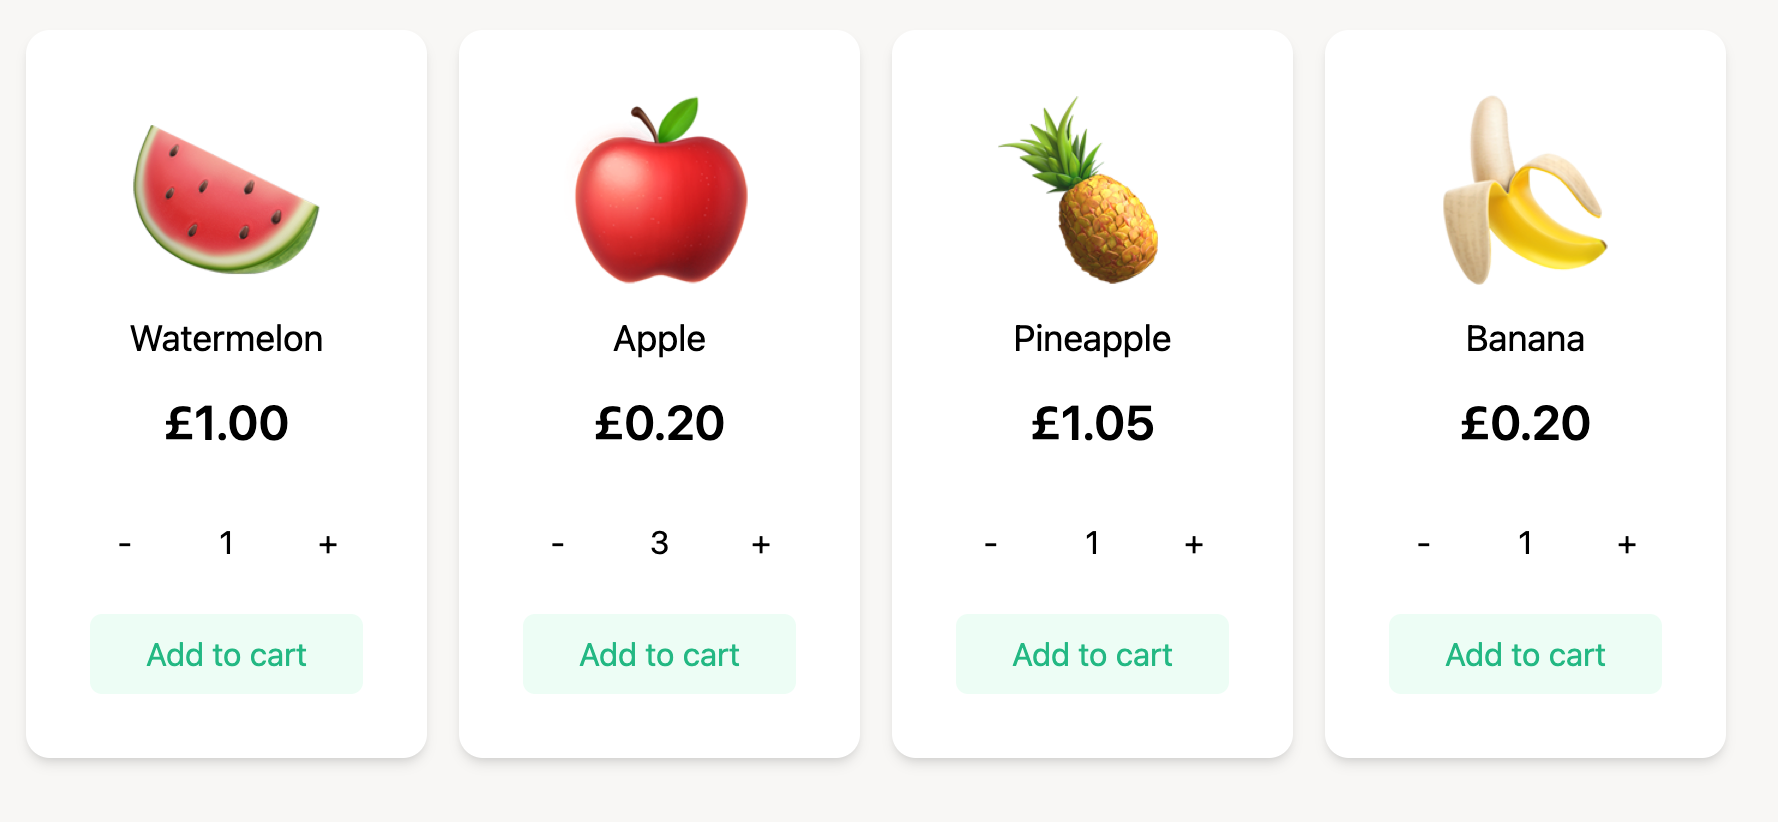 A screenshot of the fruit shop. It shows that the quantity of apples is set to 3.